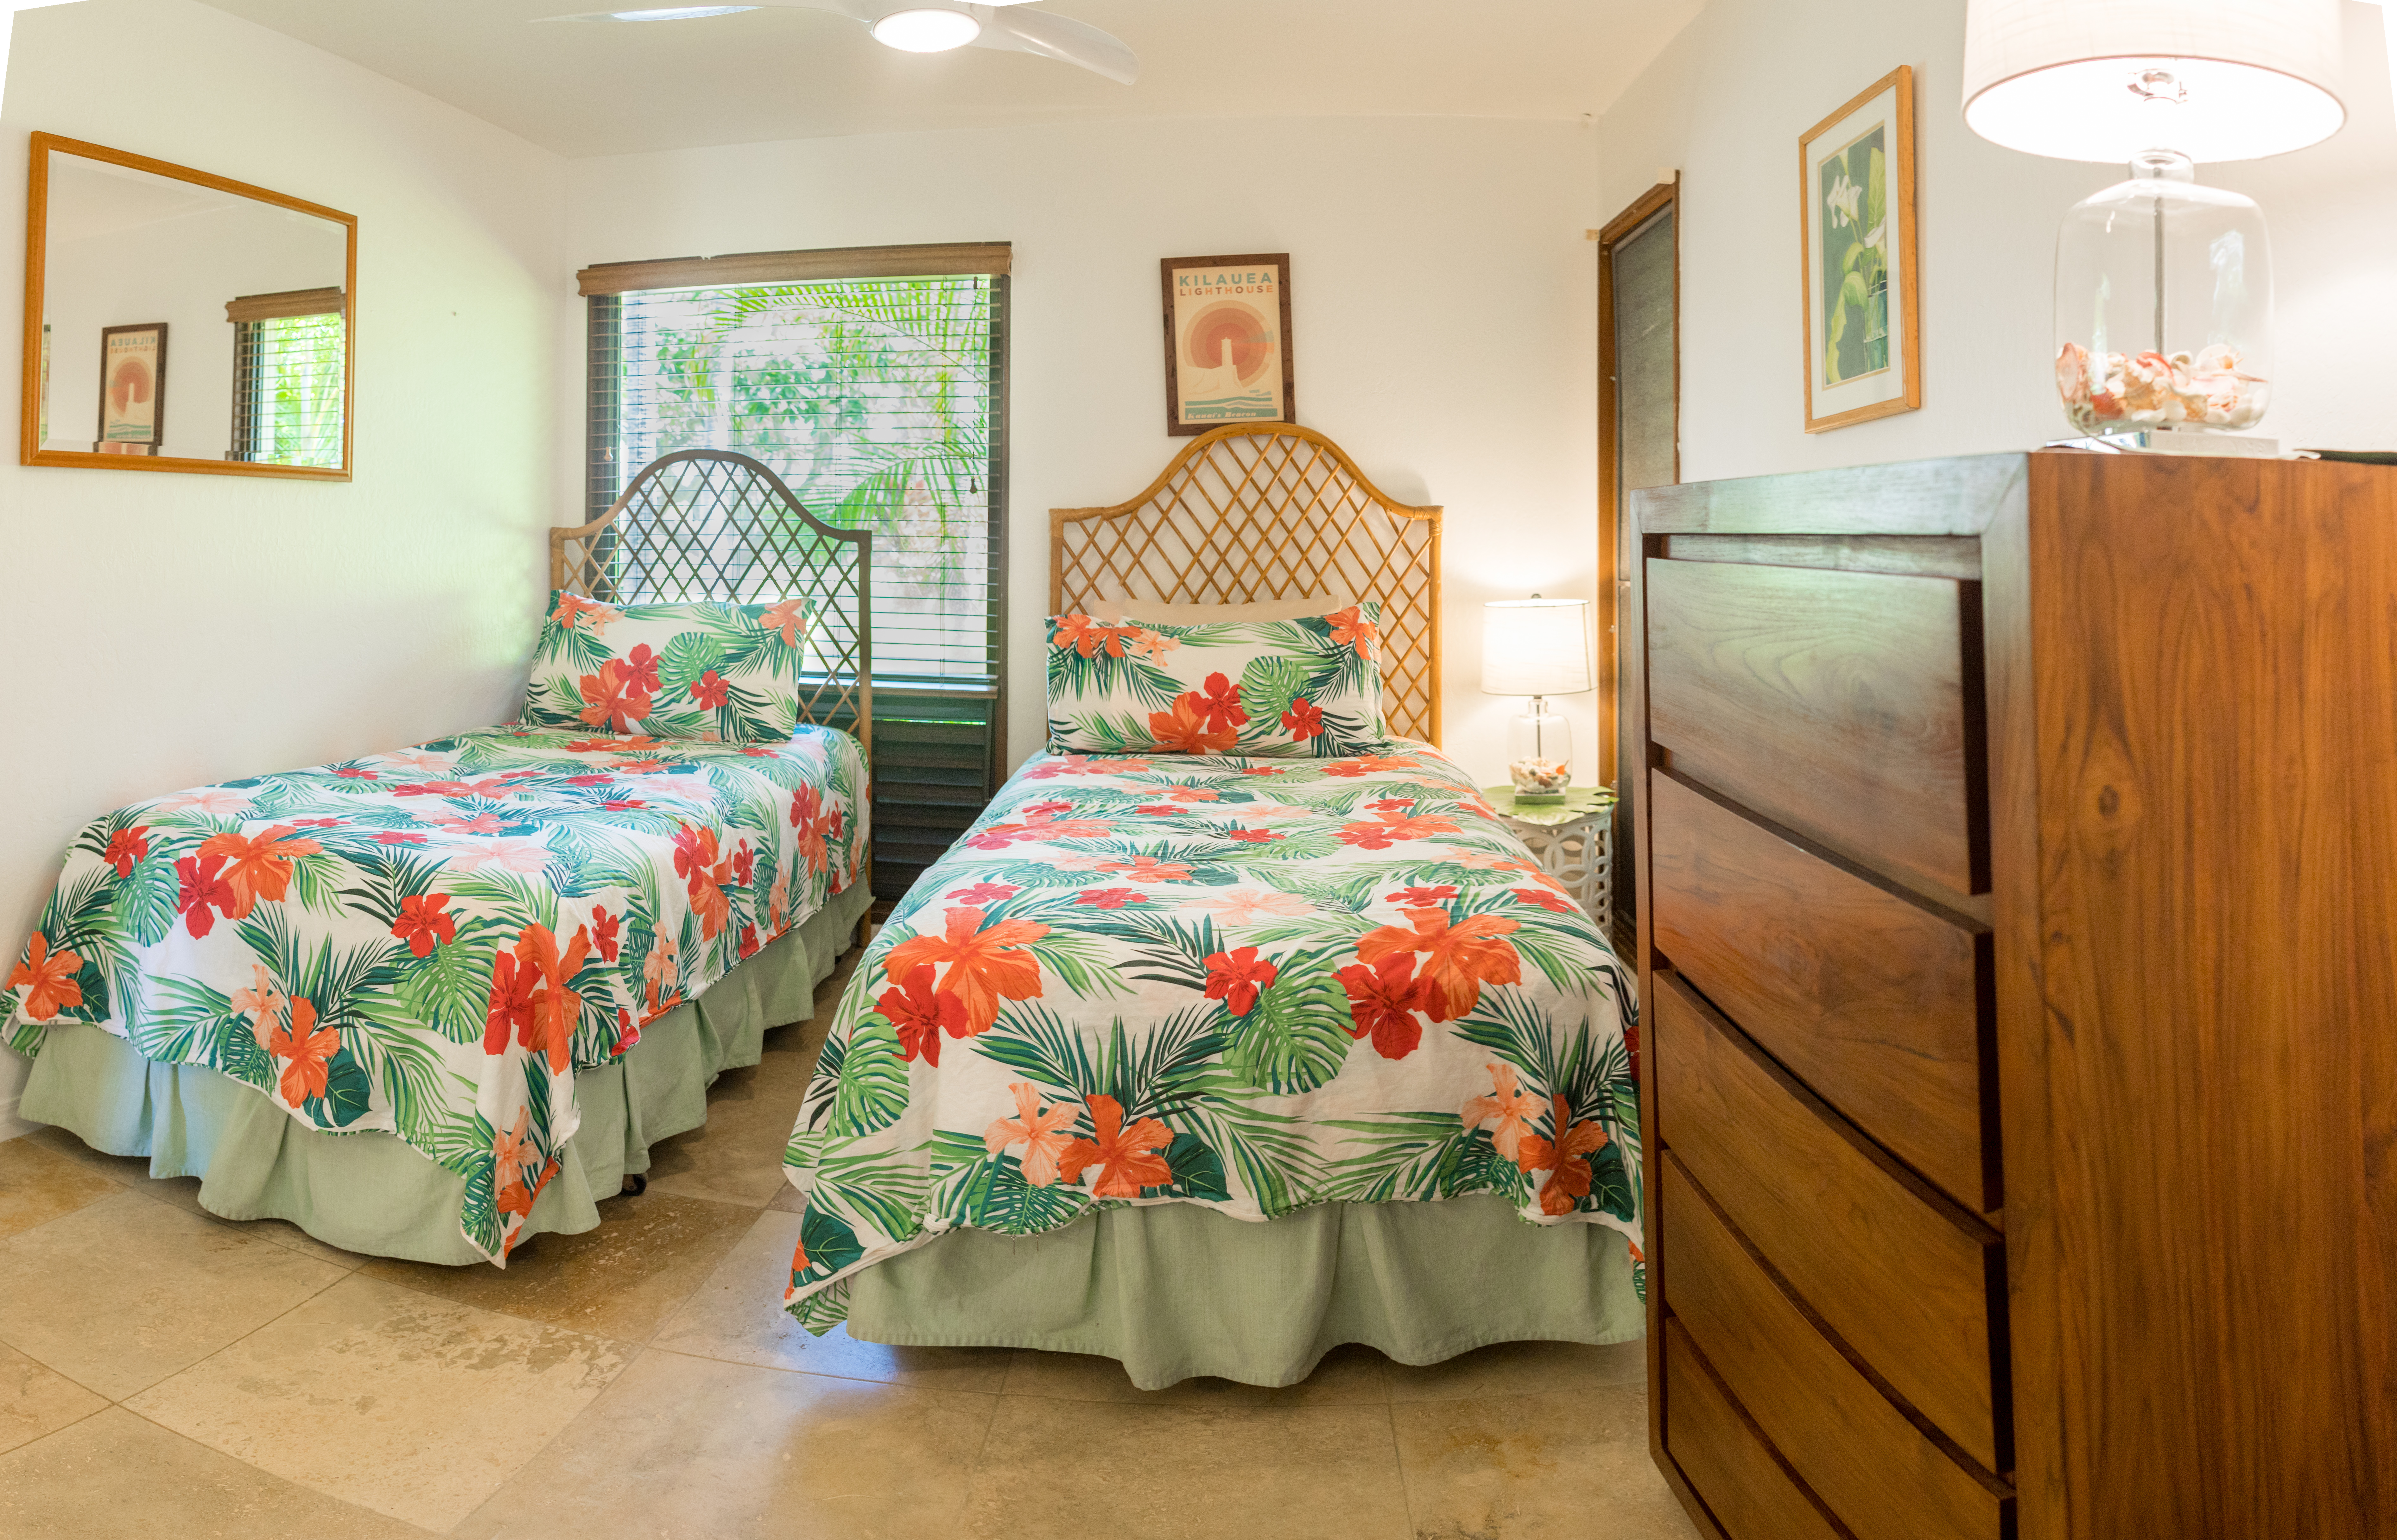 The second bedroom features two twin beds, large closet, dresser and full windows of lush greenery. 